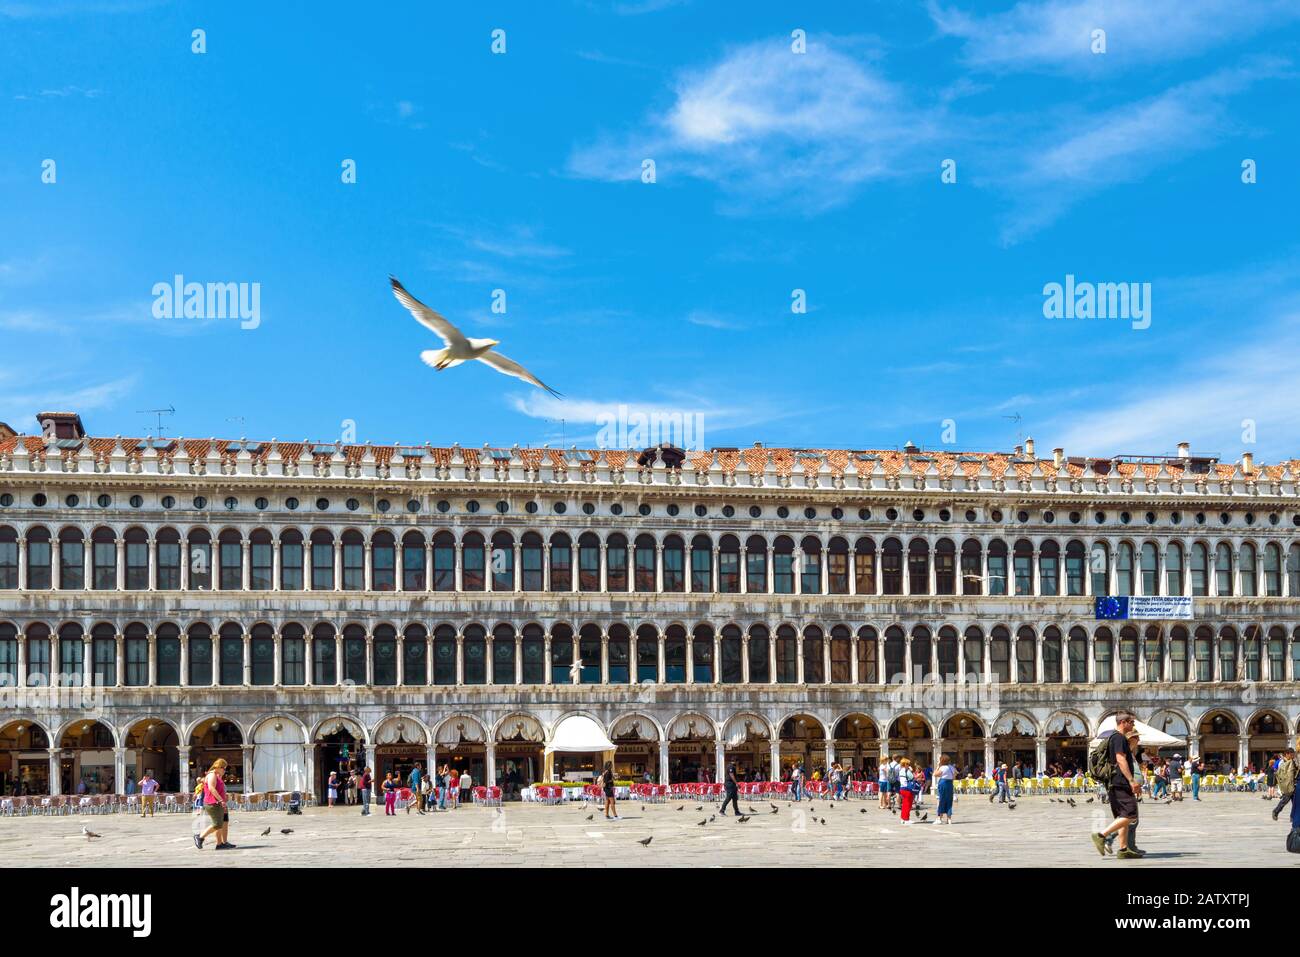 Venice, Italy - May 19, 2017: Piazza San Marco or St Mark`s Square in Venice. It is a top tourist attraction of Venice. Panorama of the Procuratie Vec Stock Photo